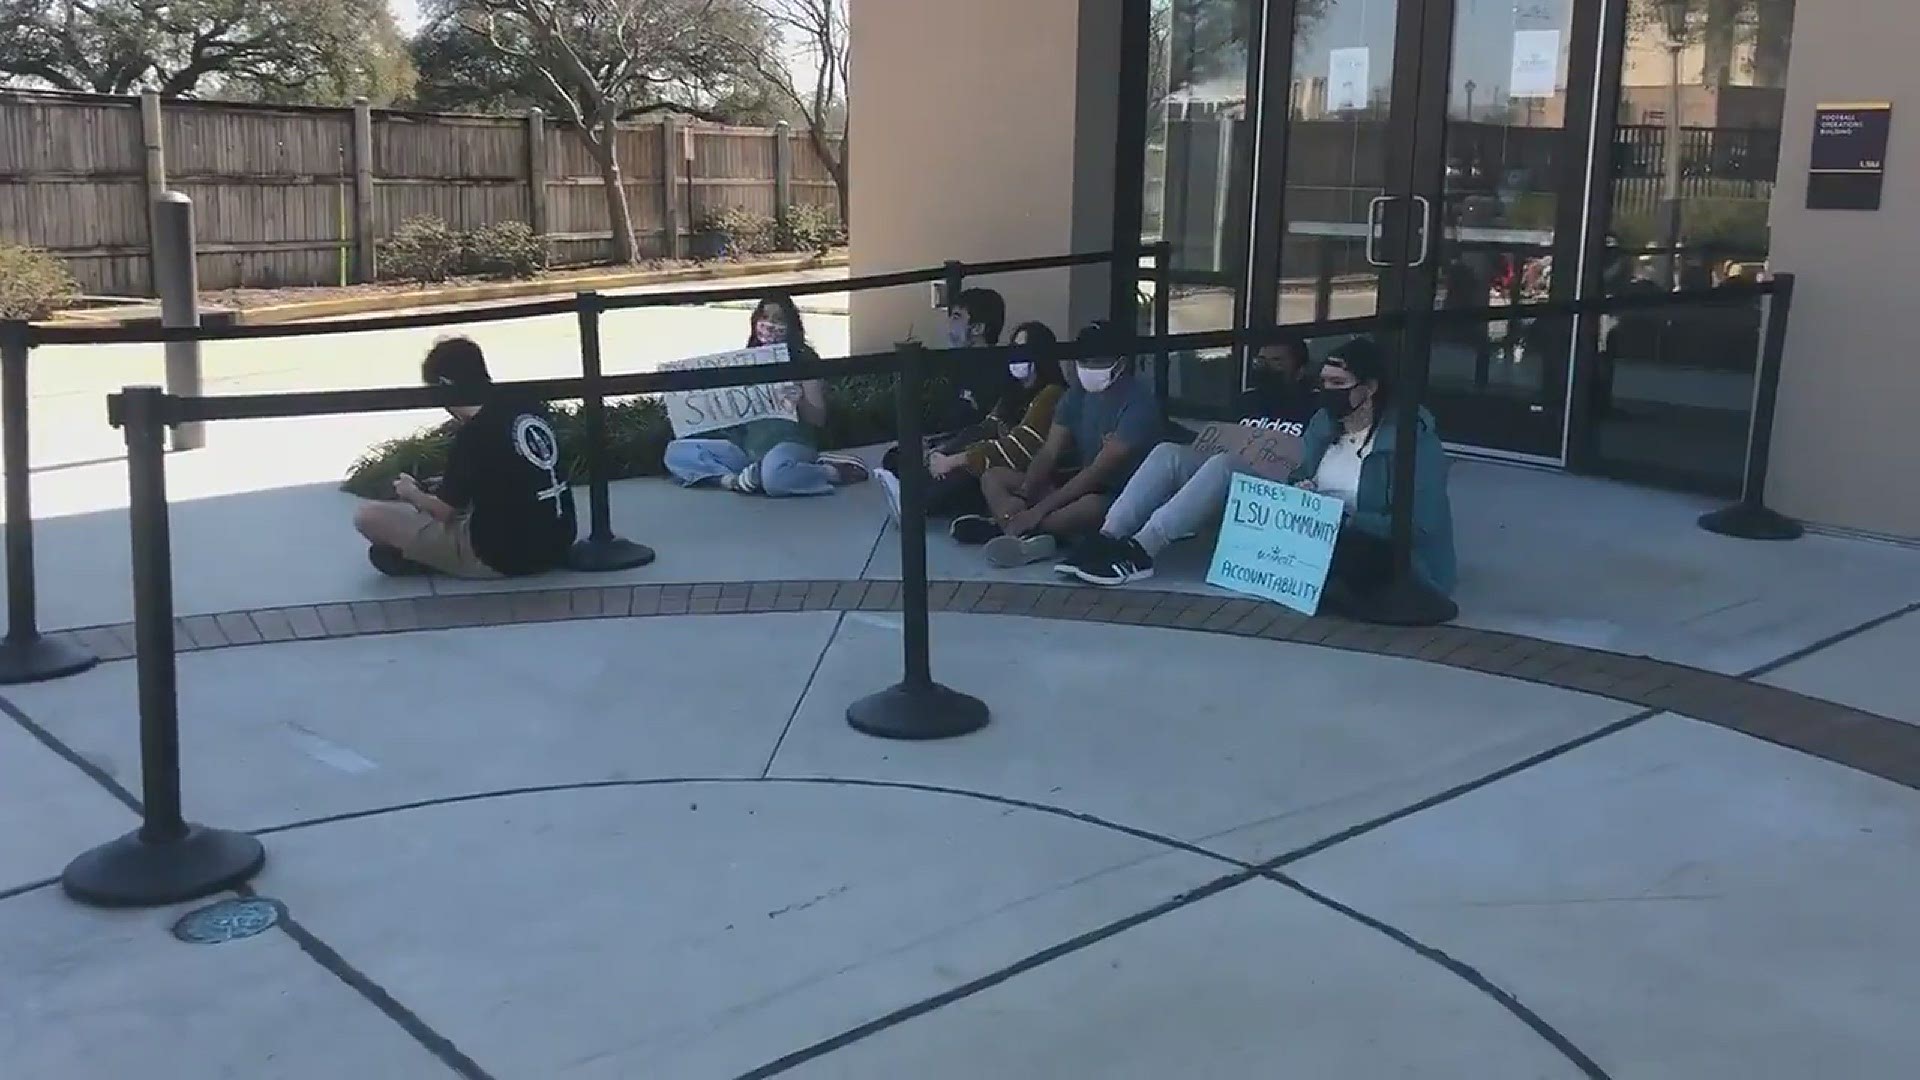 Some students held a protest Monday at LSU over the recent findings of an investigation into the school's response to sexual assault and harassment claims.